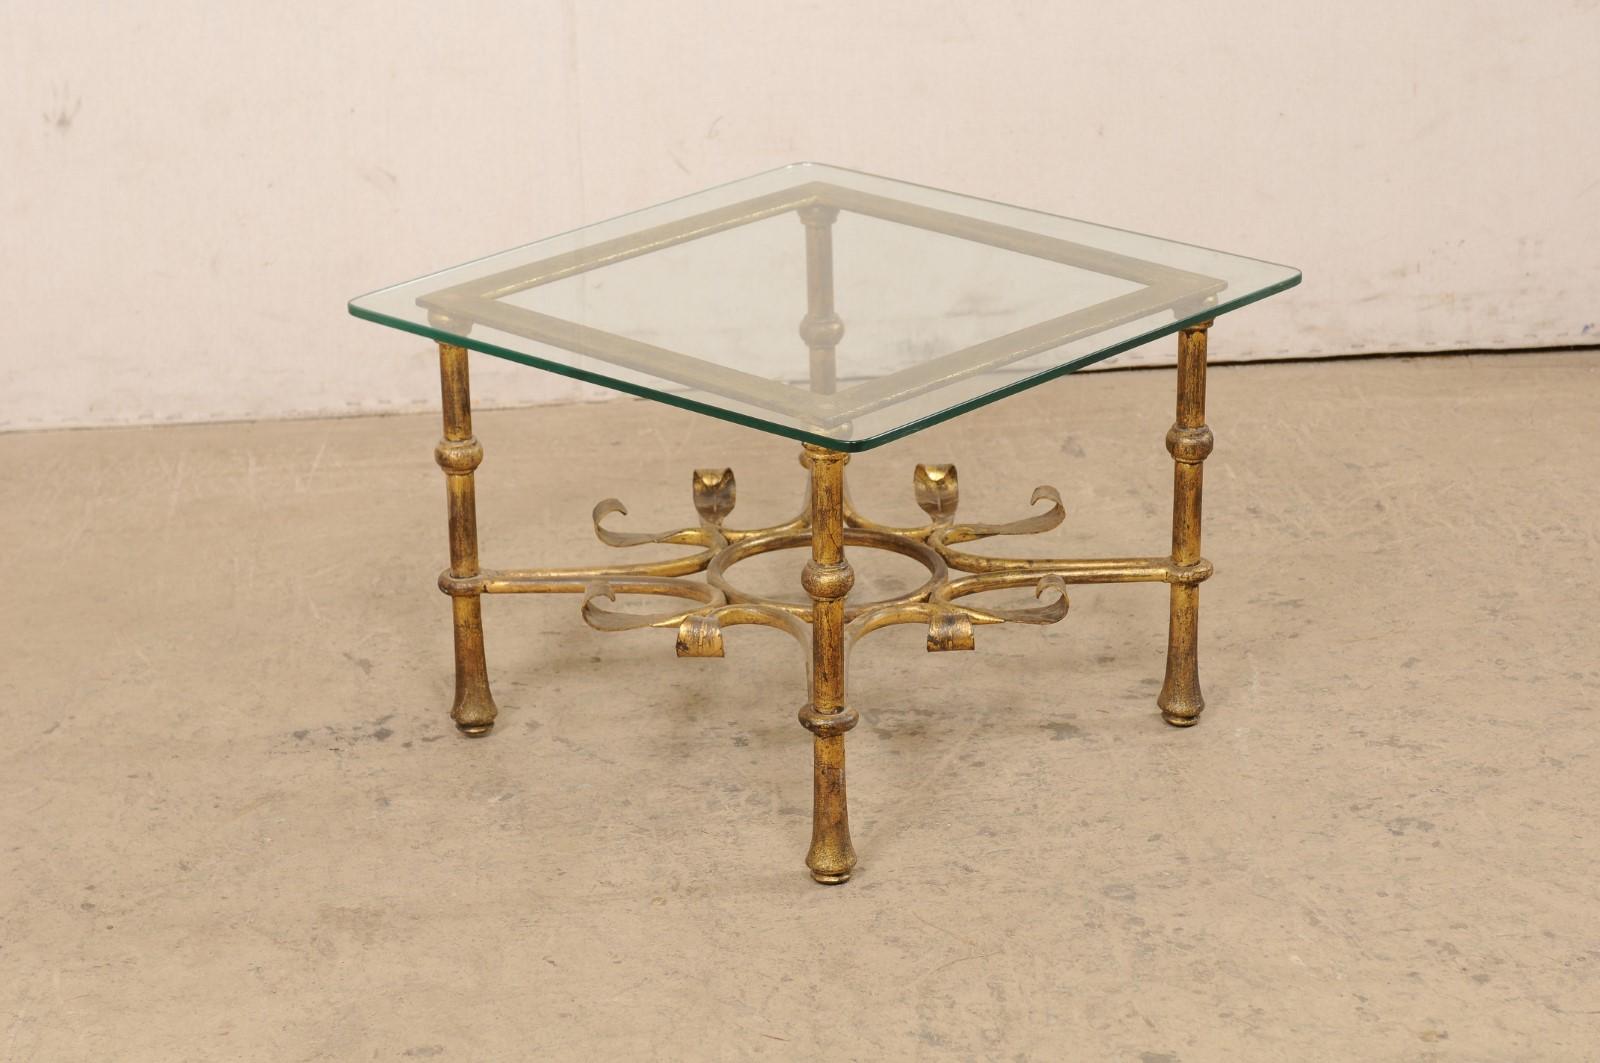 Spanish Accent Table with Gilt Iron Base & Square-Shaped Glass Top, Mid 20th C. For Sale 7